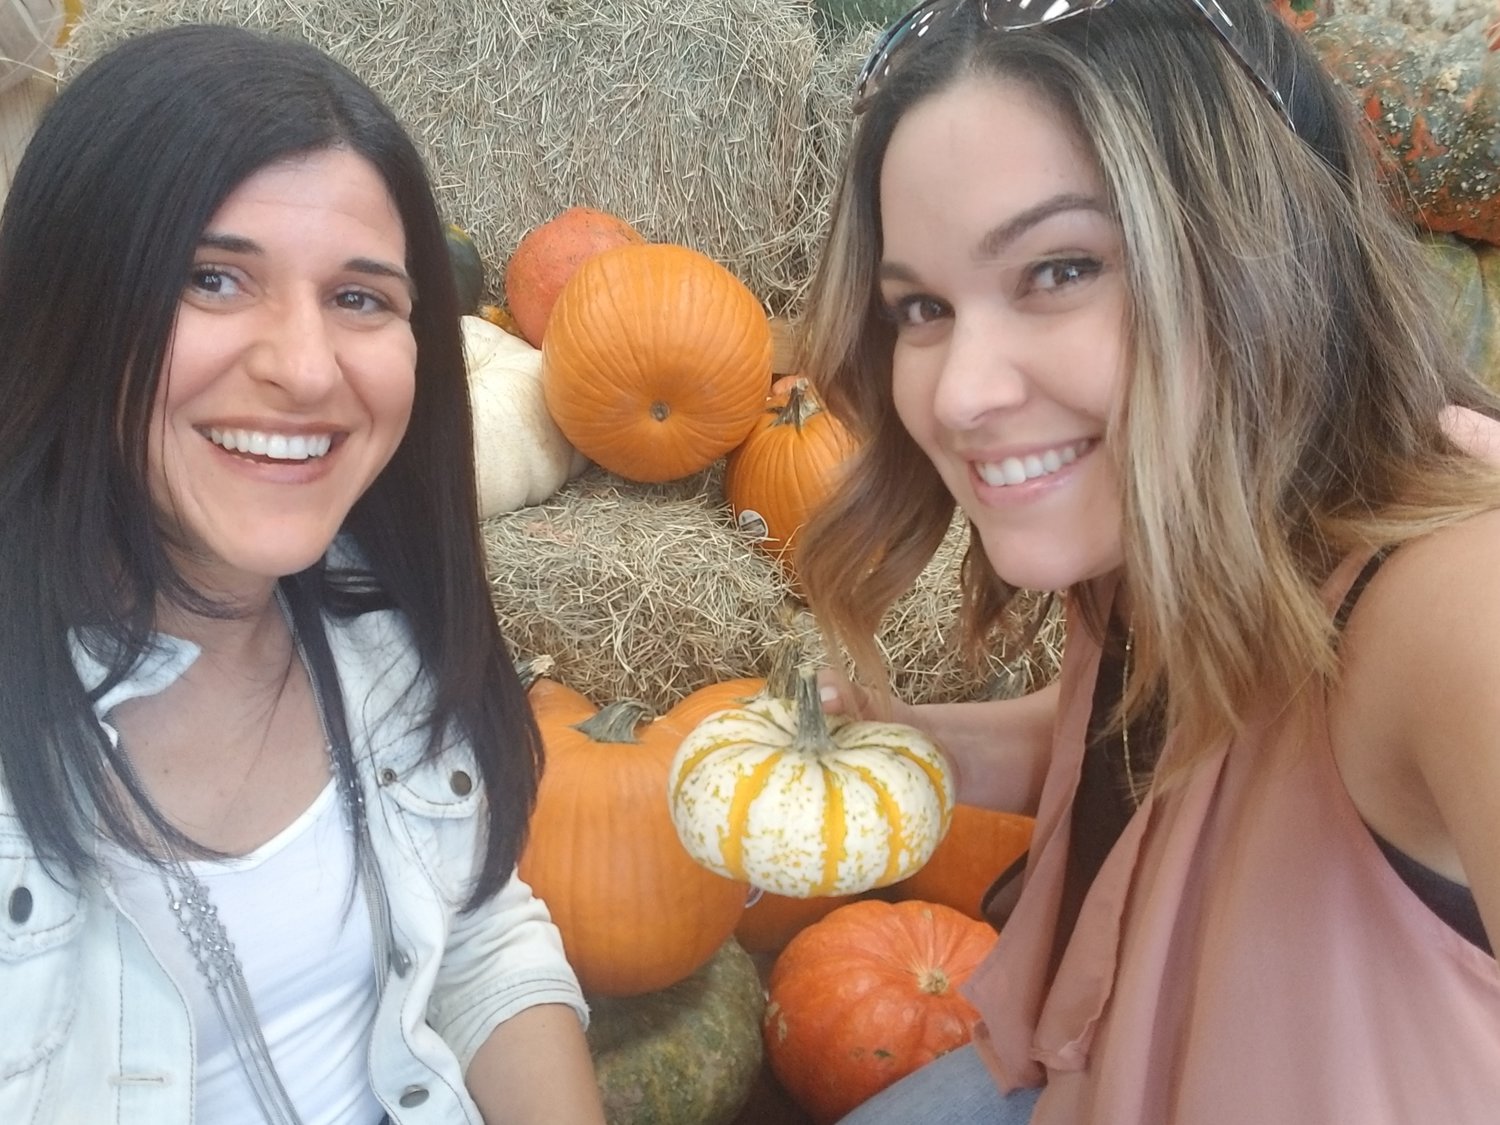 A little free photo session at the pumpkin patch, aka Trader Joe’s. There weren’t any other pumpkin patches open the day we went, so we went to the next best thing. The pictures we took are priceless and well, looks like we’re at a pumpkin patch.